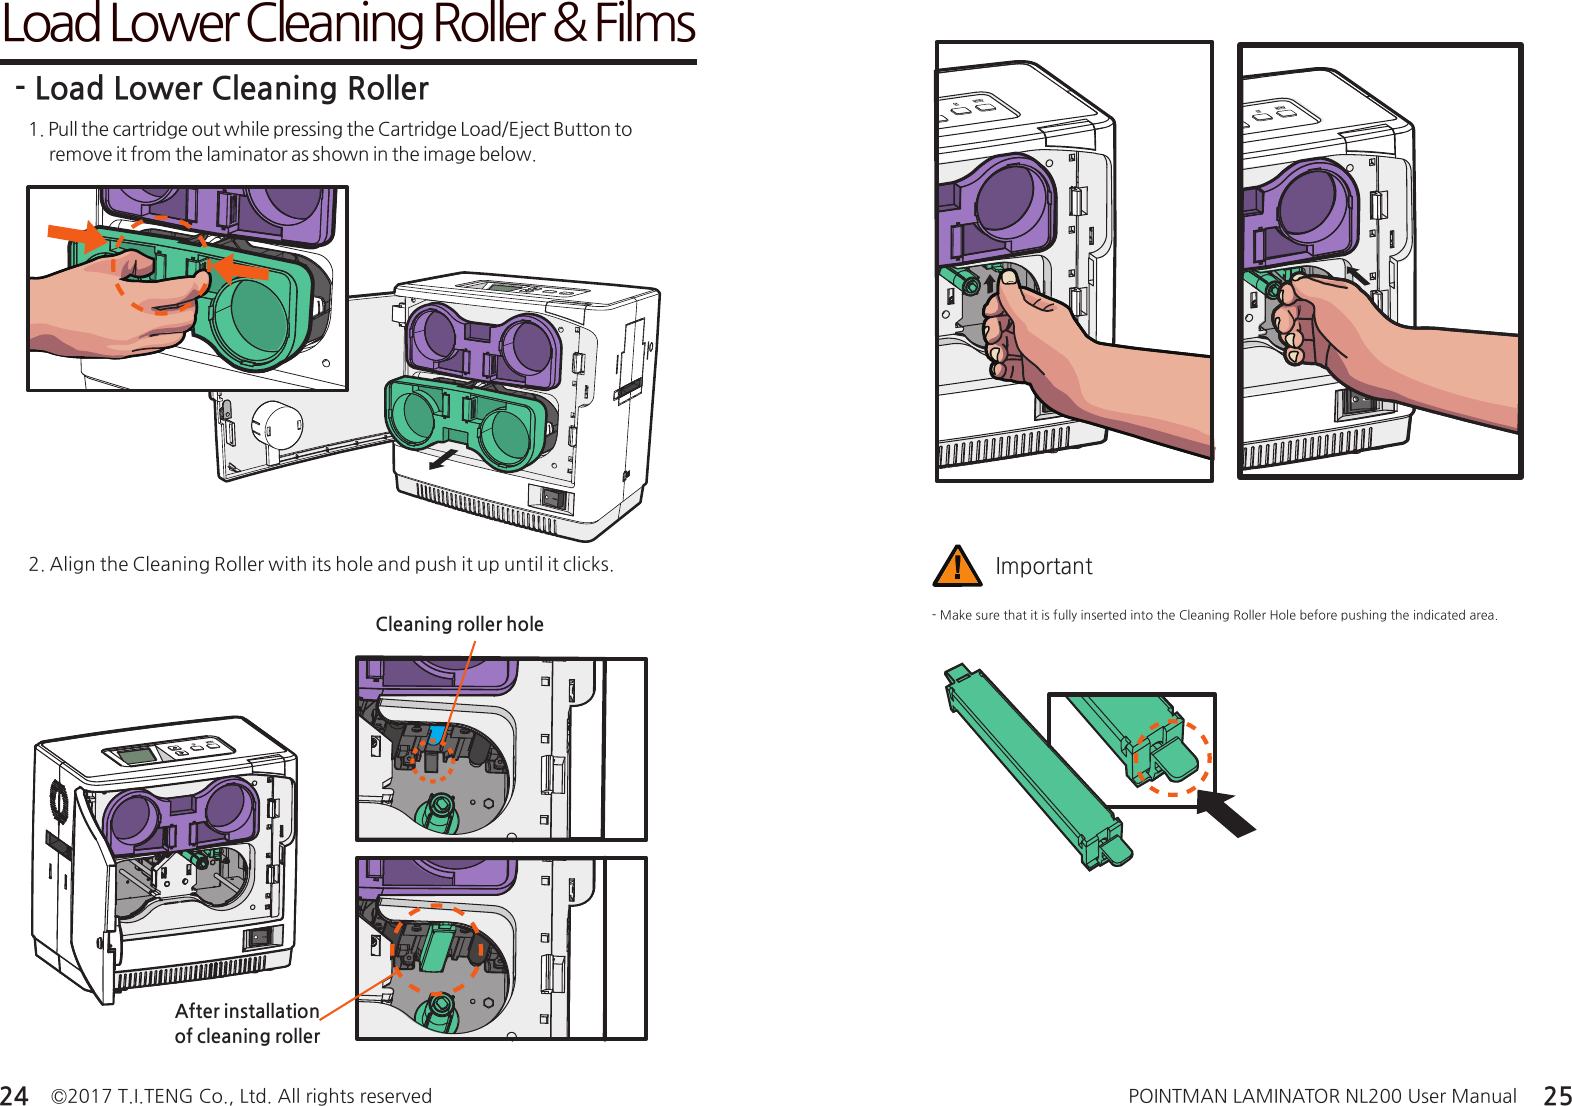 ©2017 T.I.TENG Co., Ltd. All rights reserved POINTMAN LAMINATOR NL200 User Manual24 25Load Lower Cleaning Roller &amp; Films1. Pull the cartridge out while pressing the Cartridge Load/Eject Button to       remove it from the laminator as shown in the image below.- Load Lower Cleaning Roller2. Align the Cleaning Roller with its hole and push it up until it clicks.- Make sure that it is fully inserted into the Cleaning Roller Hole before pushing the indicated area.ImportantAfter installation of cleaning rollerCleaning roller hole